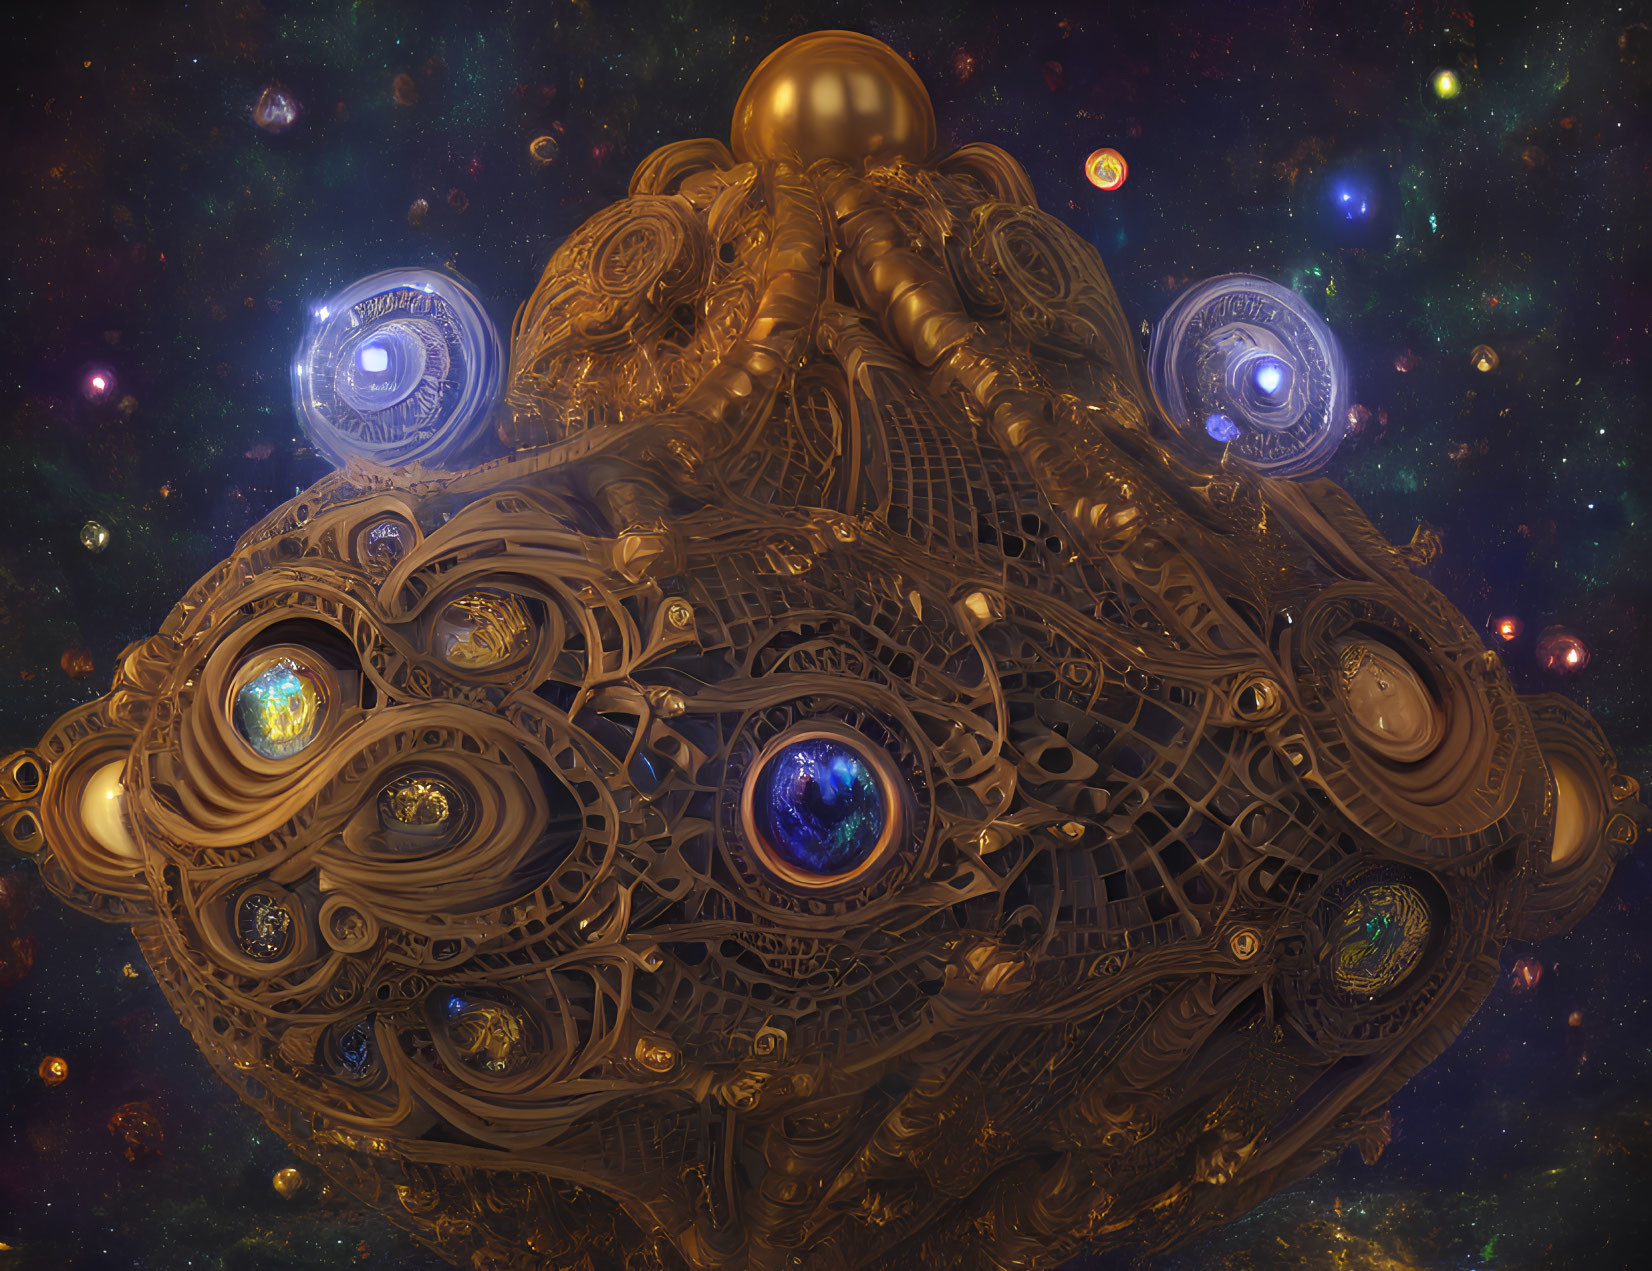 Intricate cosmic entity with mechanical features in starry galaxy